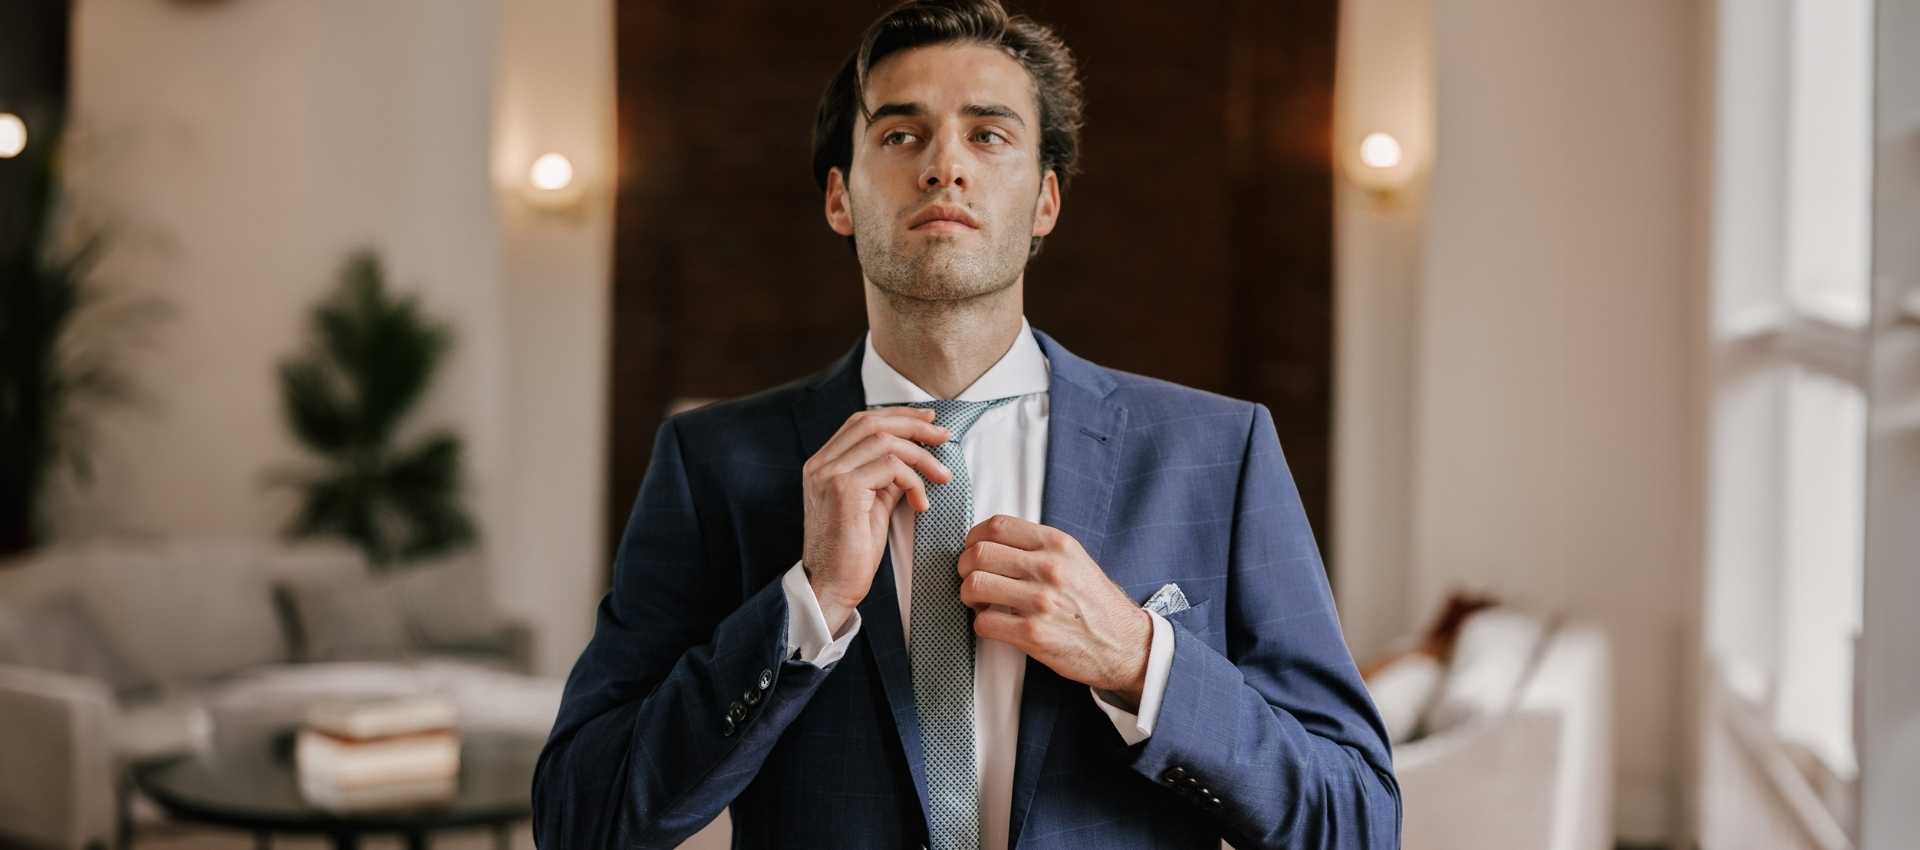 Non-iron and Wrinkle Free Dress Shirts for Men from Dandy & Son. Image of a man wearing a Extreme Cutaway Collar Shirt from Dandy & Son.